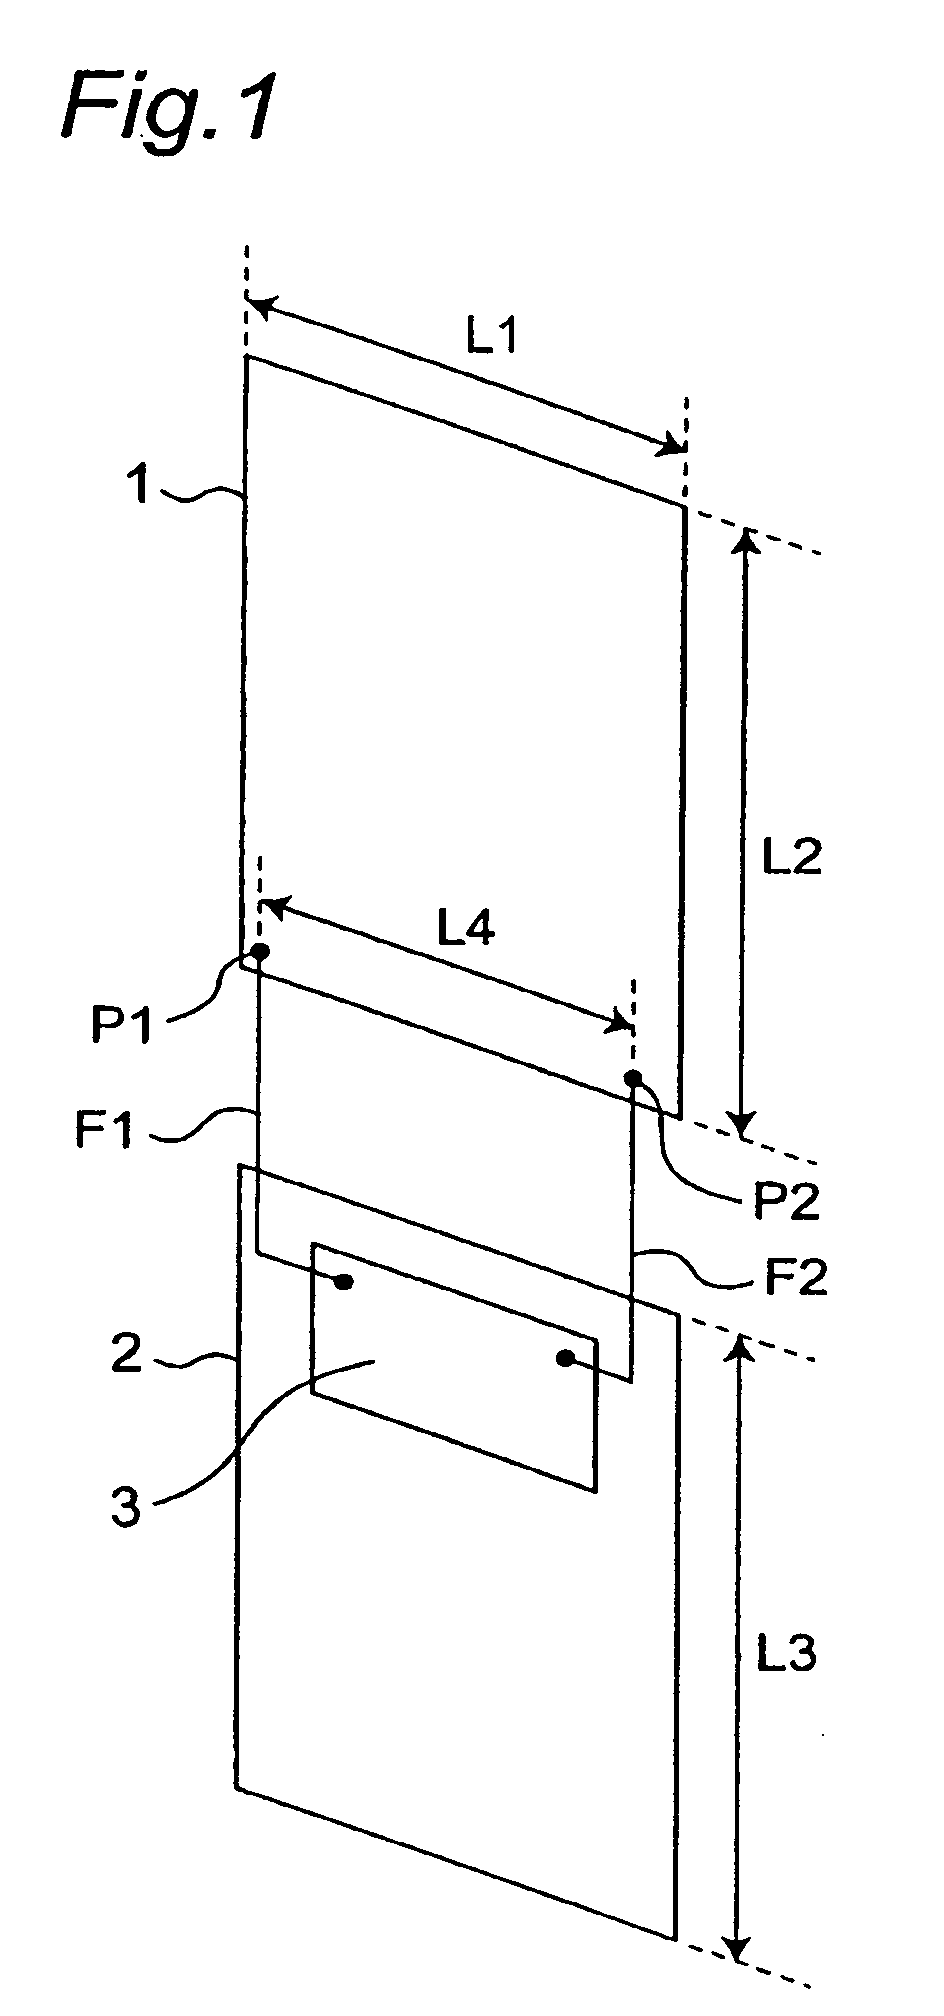 Antenna apparatus provided with electromagnetic coupling adjuster and antenna element excited through multiple feeding points